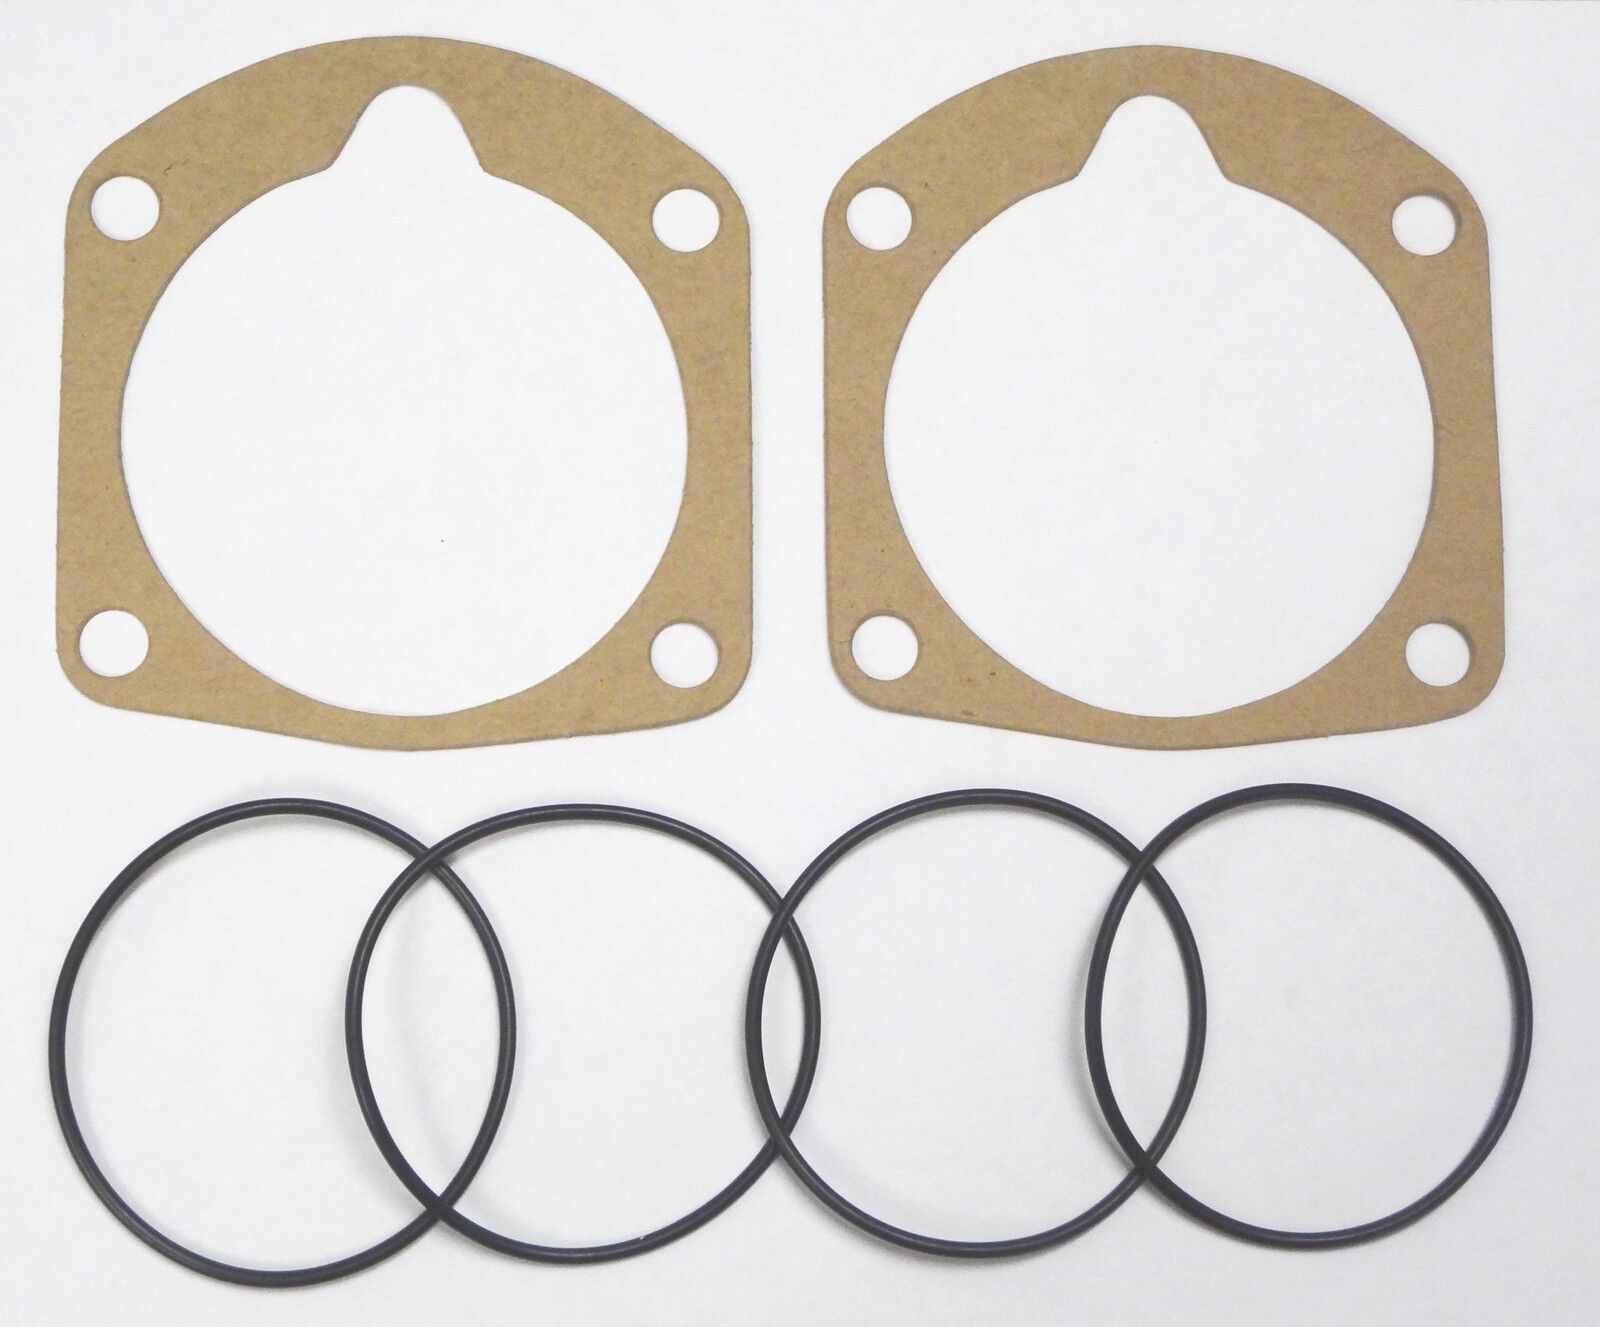 1958 1959 1960 1961 1962 1963 1964 Chevy Rear Wheel Bearing O-rings and Gaskets